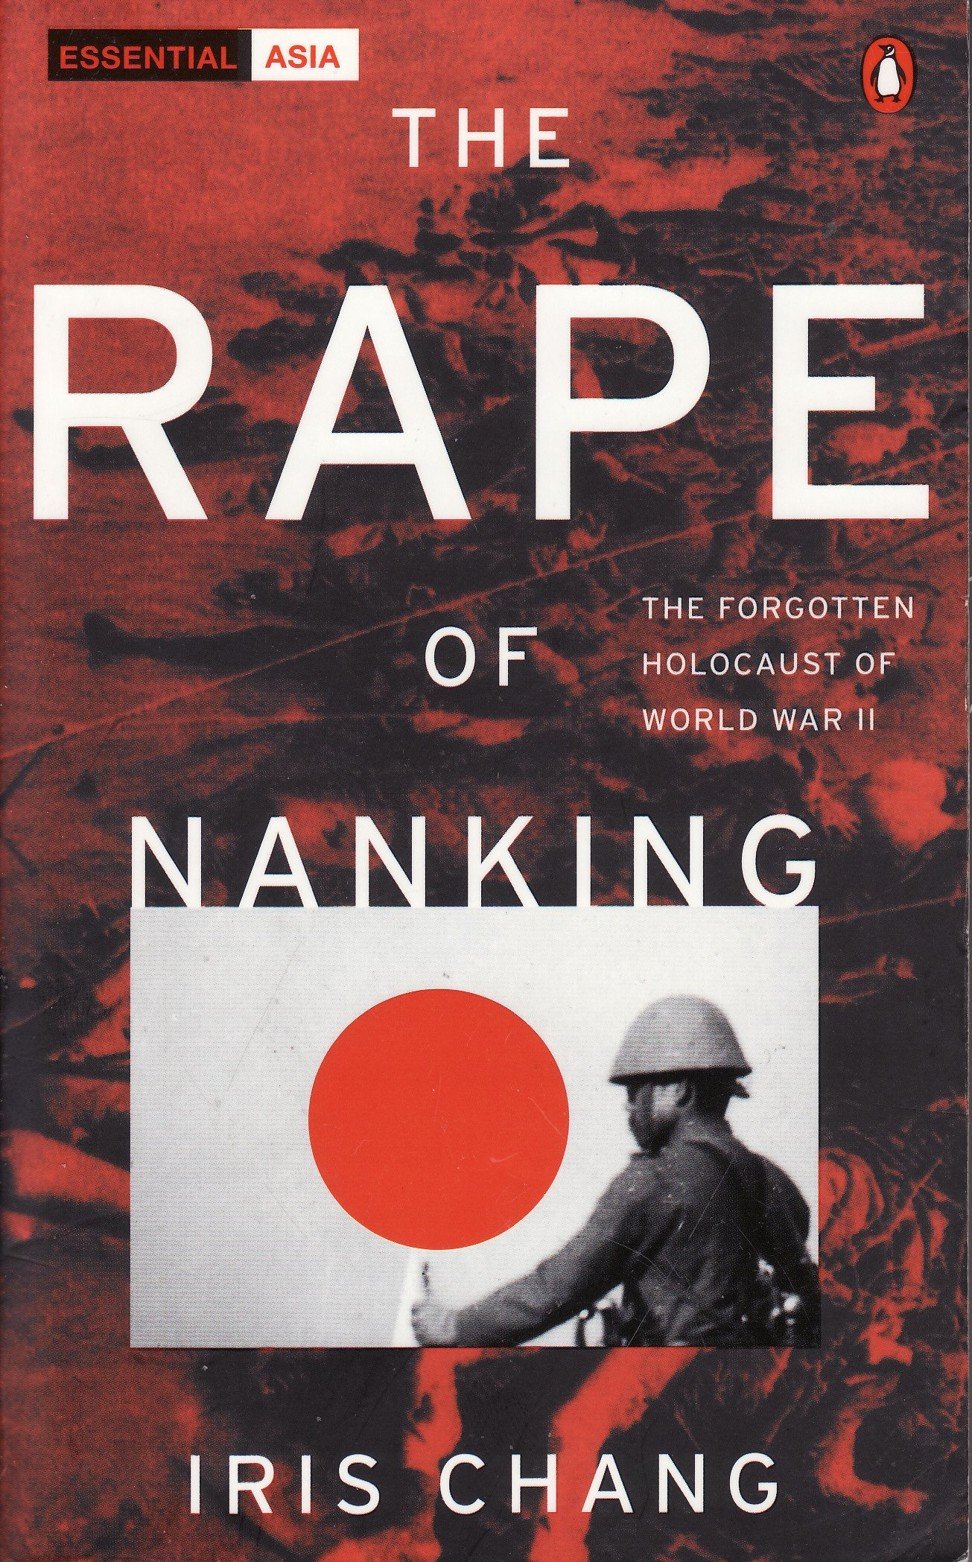 The cover of Chang’s Rape of Nanking.